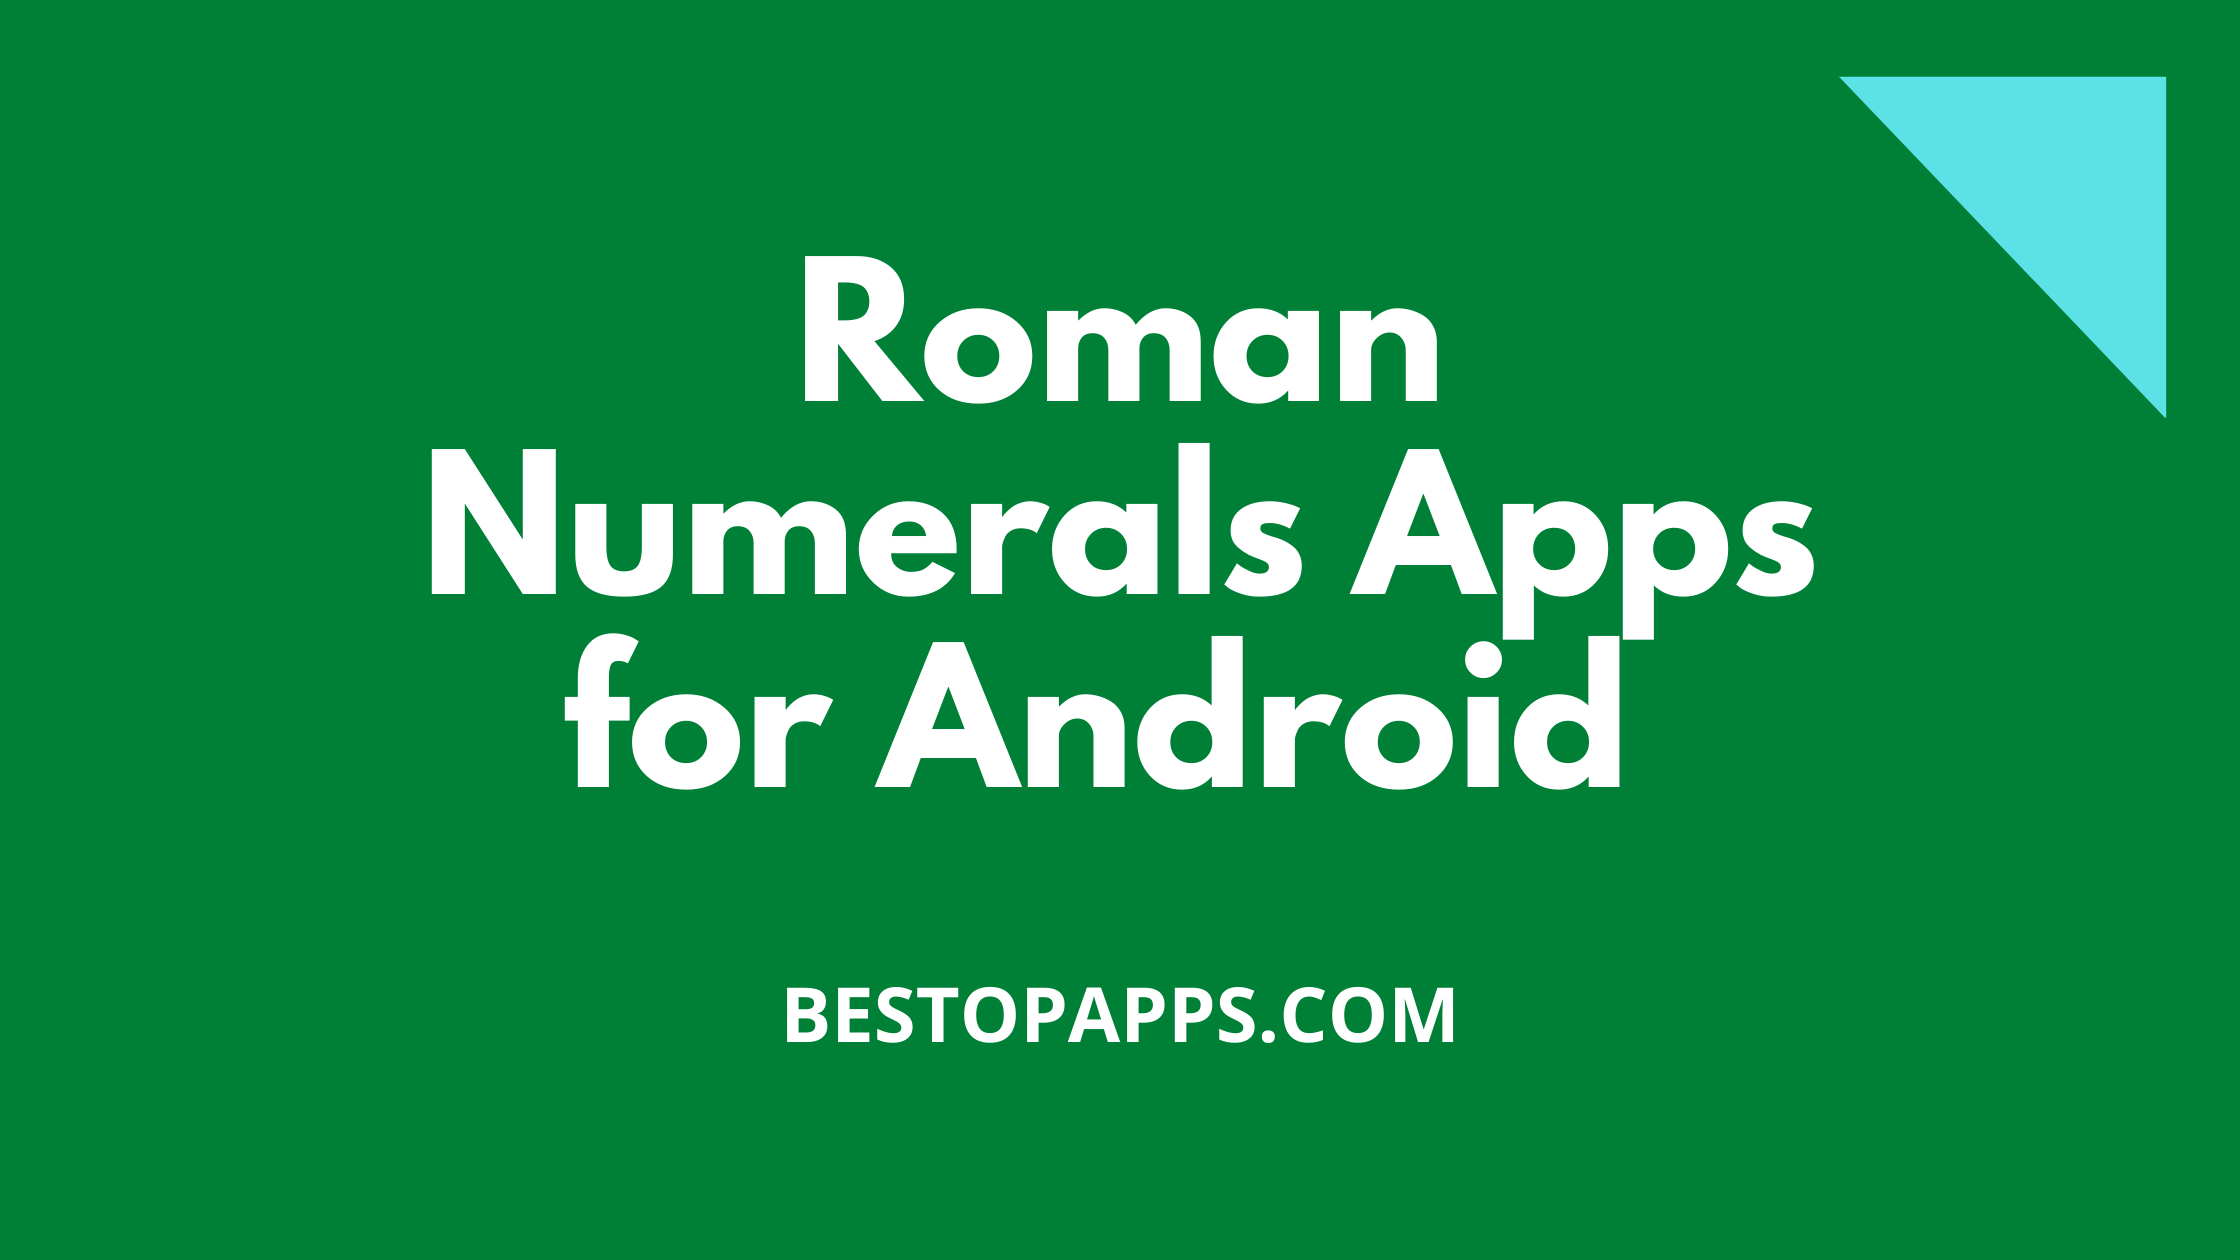 Roman Numerals Apps for Android